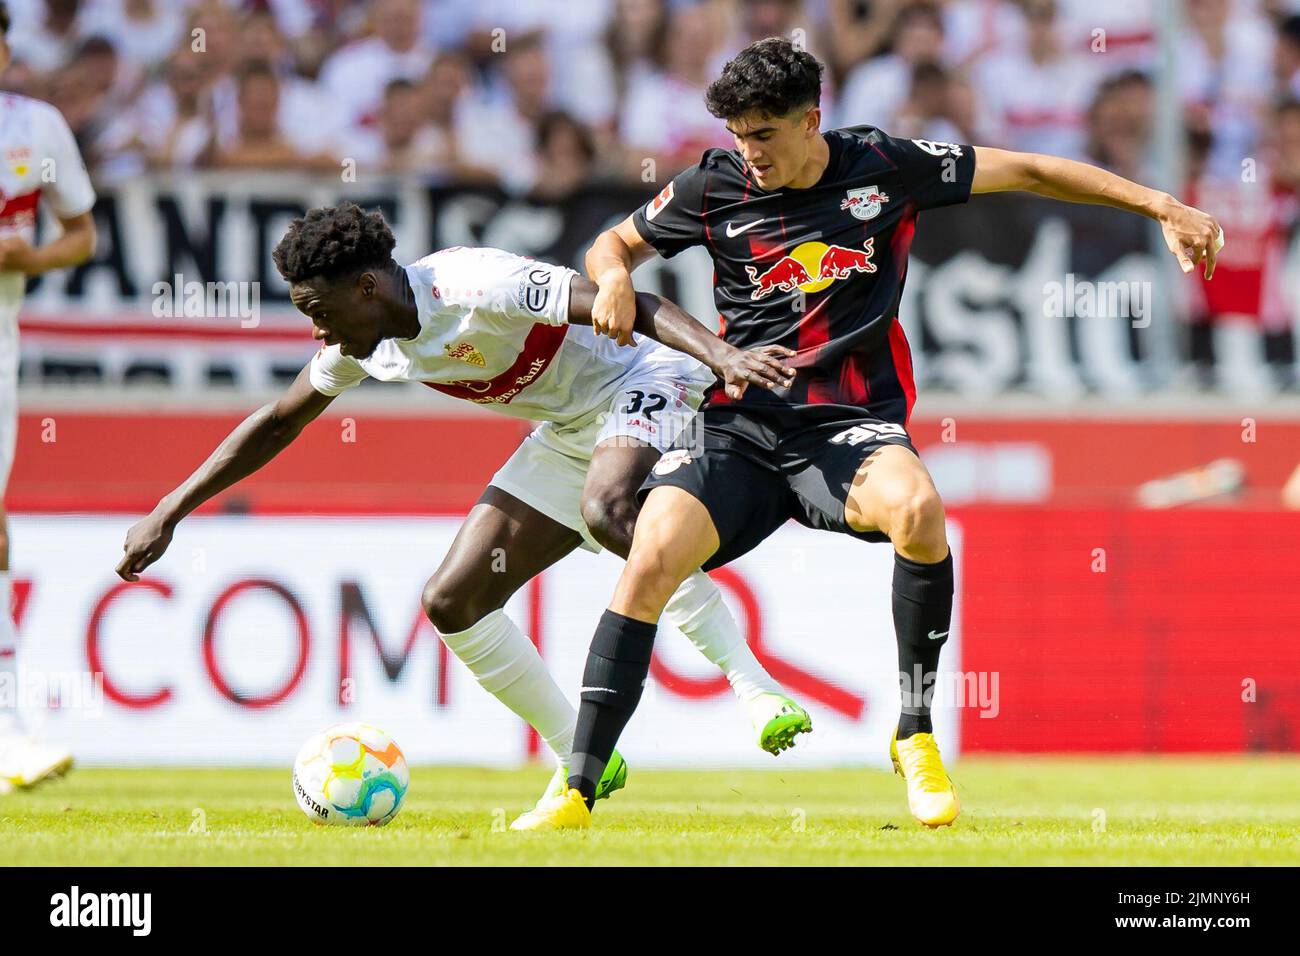 Stuttgart, Germany. 07th Aug, 2022. Soccer: Bundesliga, VfB Stuttgart - RB Leipzig, Matchday 1, Mercedes-Benz Arena. Stuttgart's Naouirou Ahamada (l) in action against Leipzig's Hugo Novoa (r). Credit: Tom Weller/dpa - IMPORTANT NOTE: In accordance with the requirements of the DFL Deutsche Fußball Liga and the DFB Deutscher Fußball-Bund, it is prohibited to use or have used photographs taken in the stadium and/or of the match in the form of sequence pictures and/or video-like photo series./dpa/Alamy Live News Stock Photo